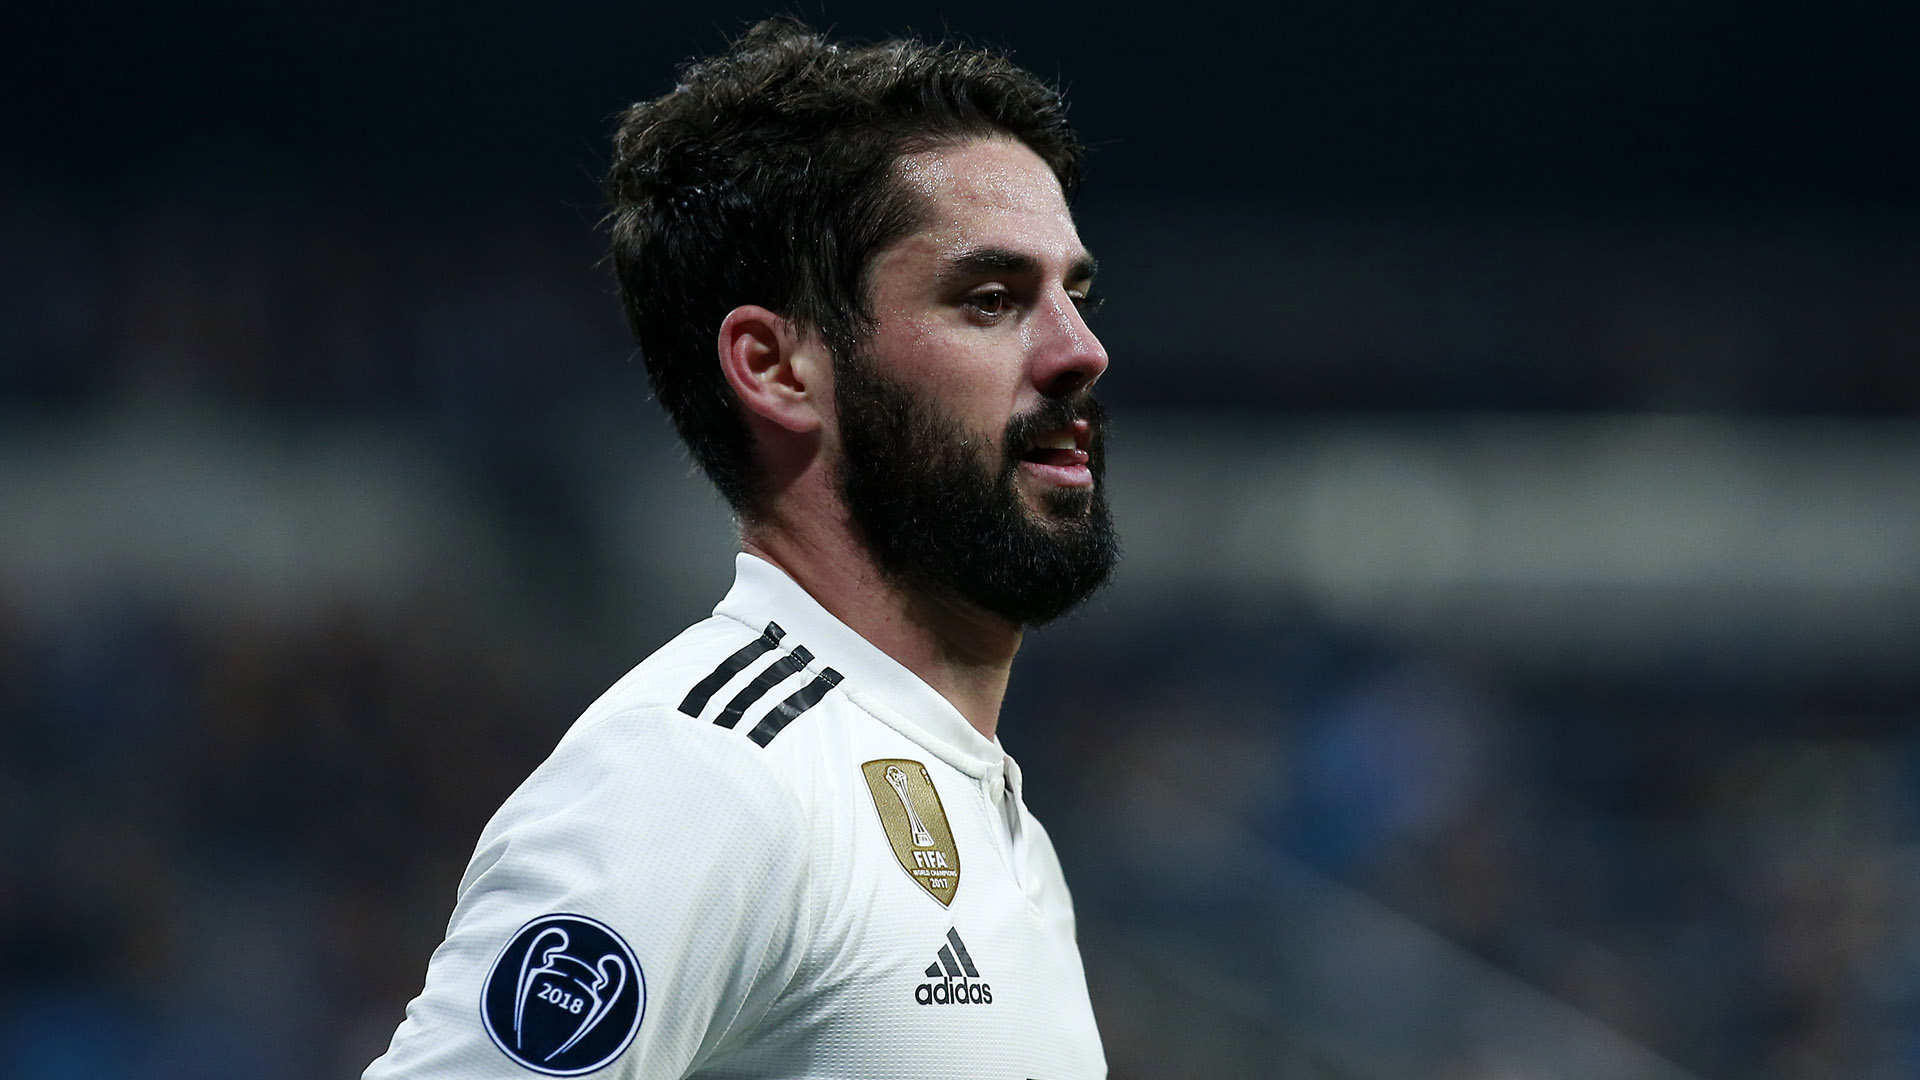 Transfer news and rumours LIVE: Real Madrid may use Isco in Hazard swap | Goal.com